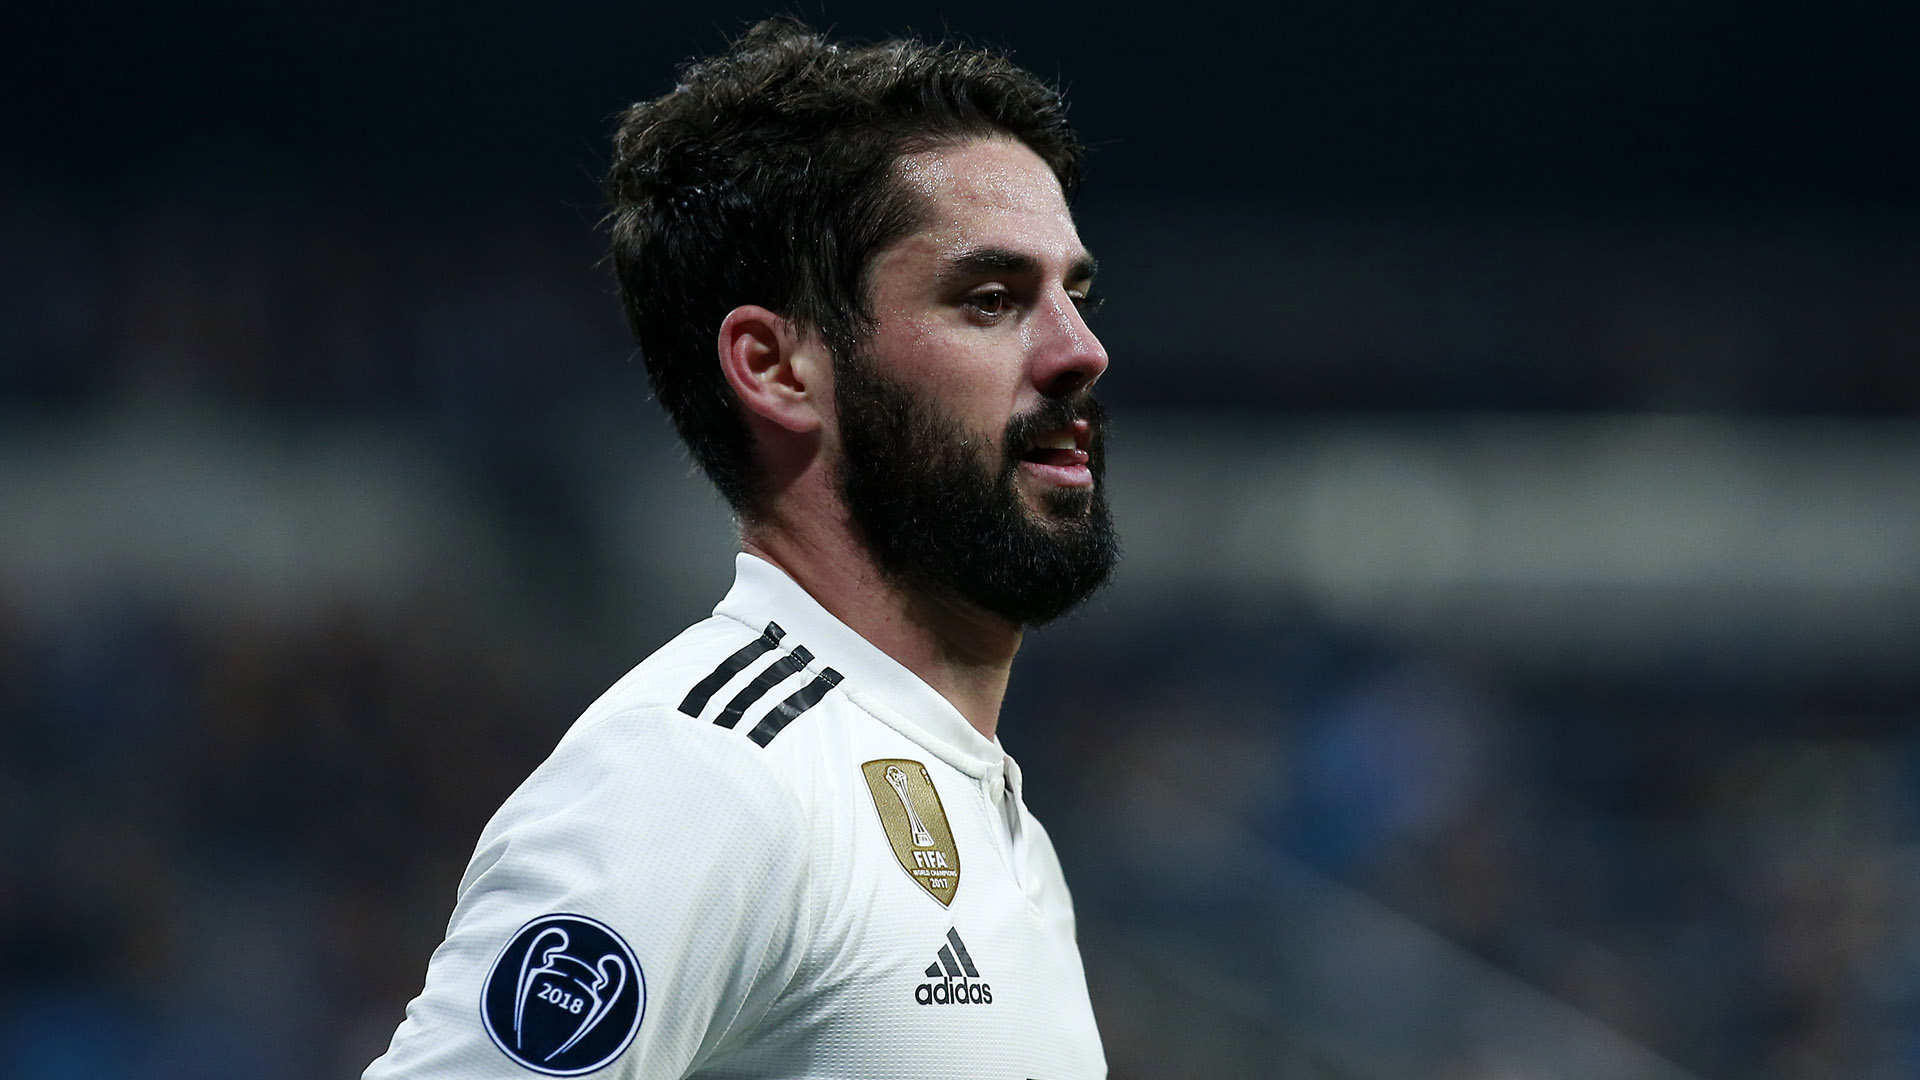 Transfer news and rumours LIVE: Real Madrid may use Isco in Hazard swap | Goal.com